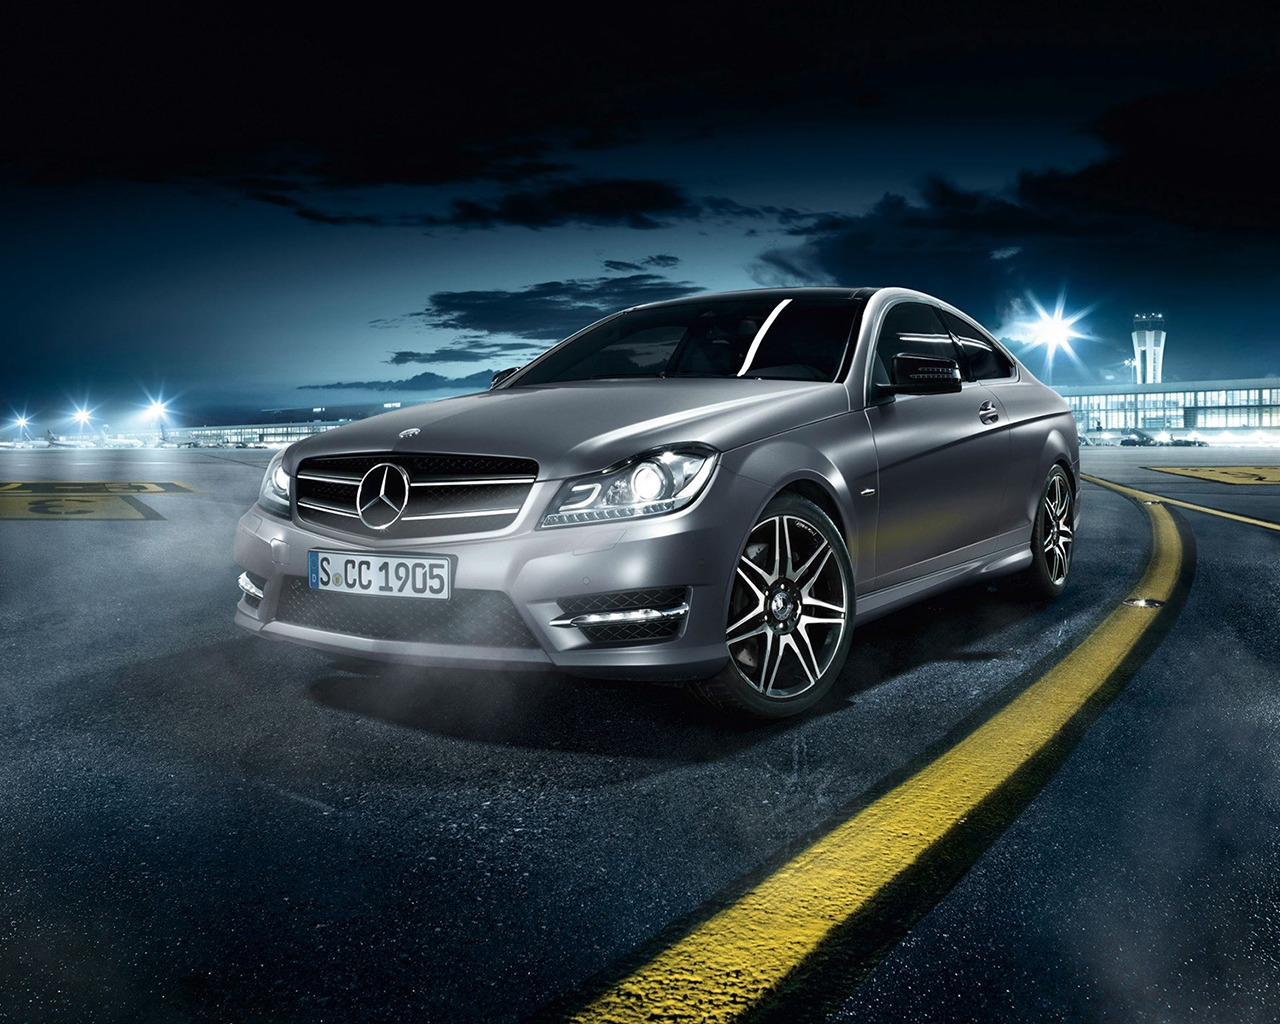 2013 Mercedes C Class AMG for 1280 x 1024 resolution